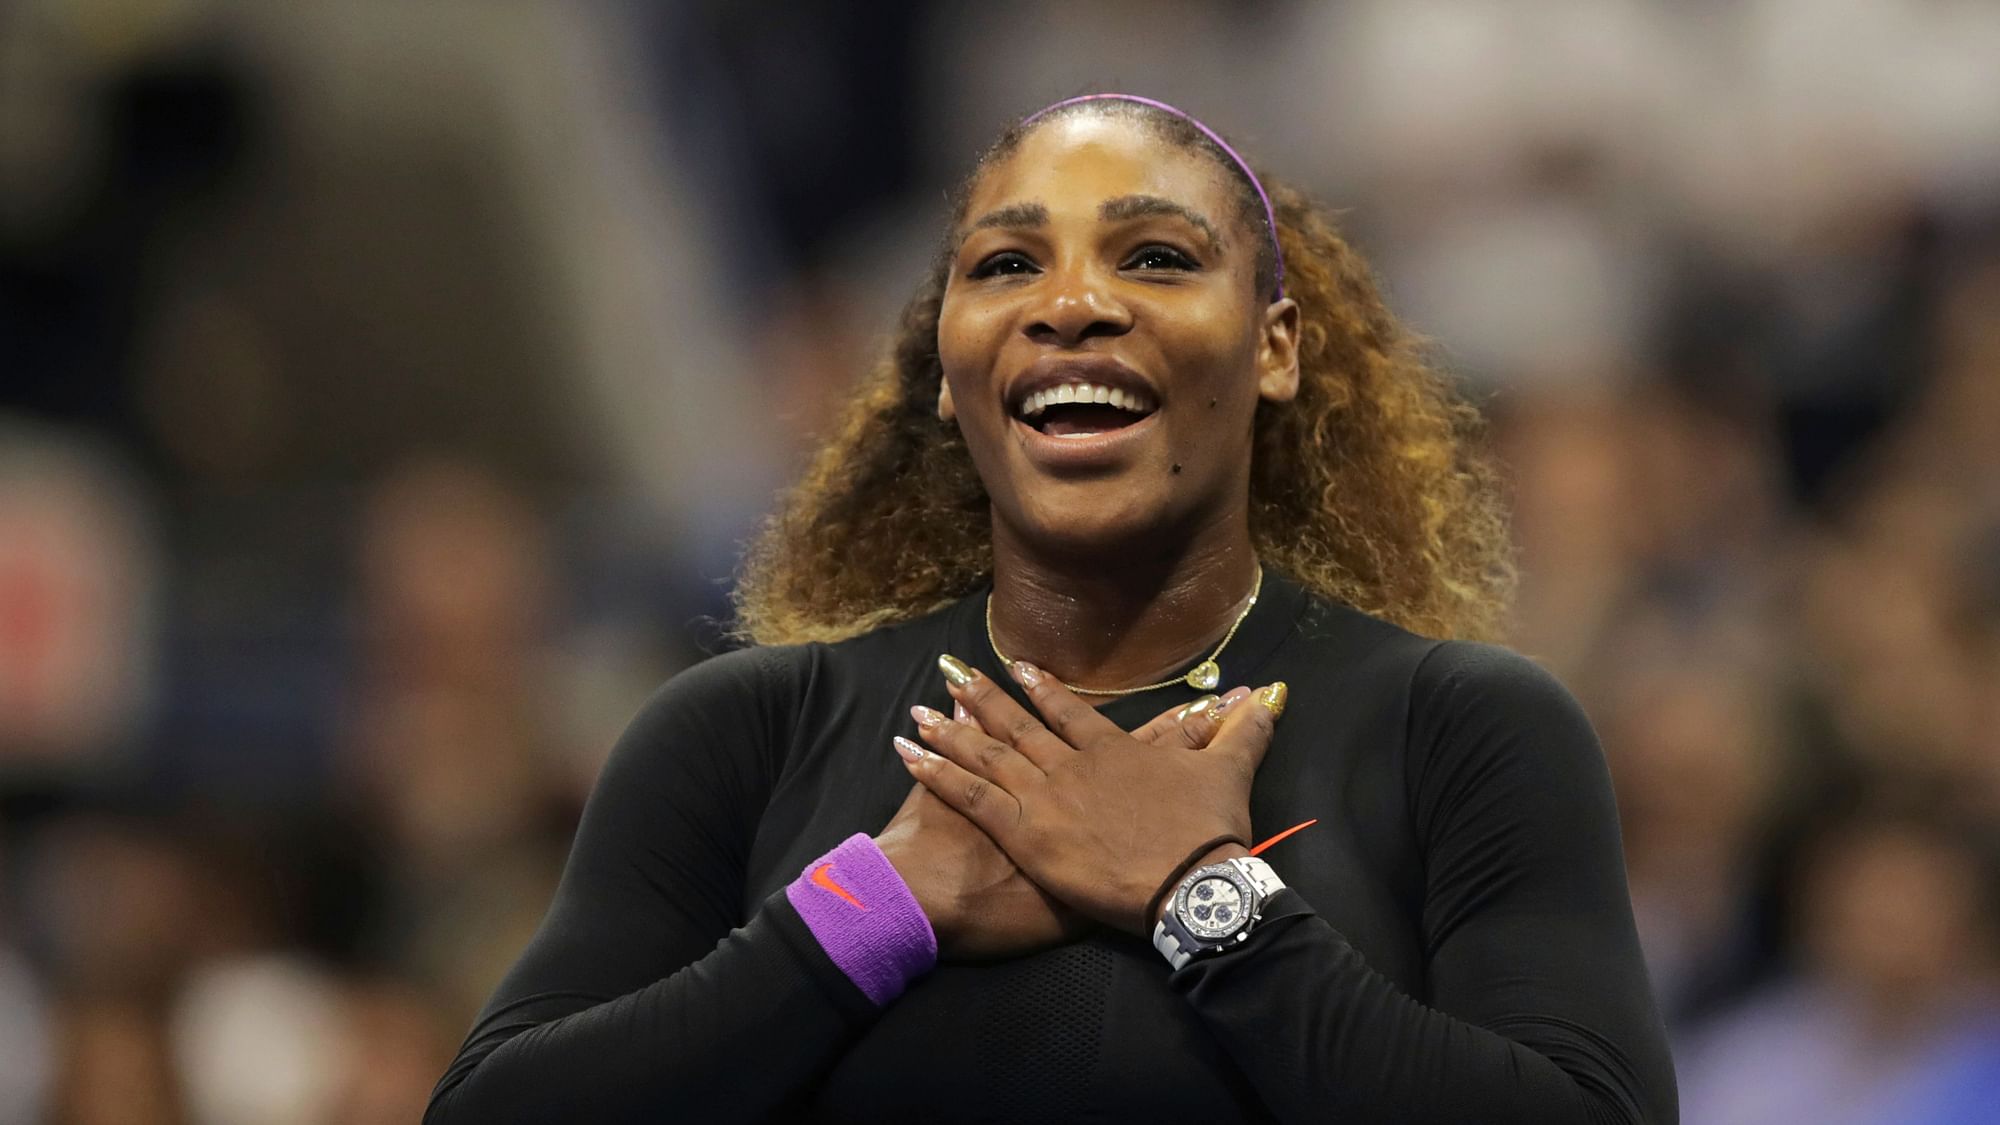 Serena Williams beat Elina Svitolina 6-3, 6-1 in the U.S. Open semifinals to give herself another shot at winning a record-equaling 24th Grand Slam title.